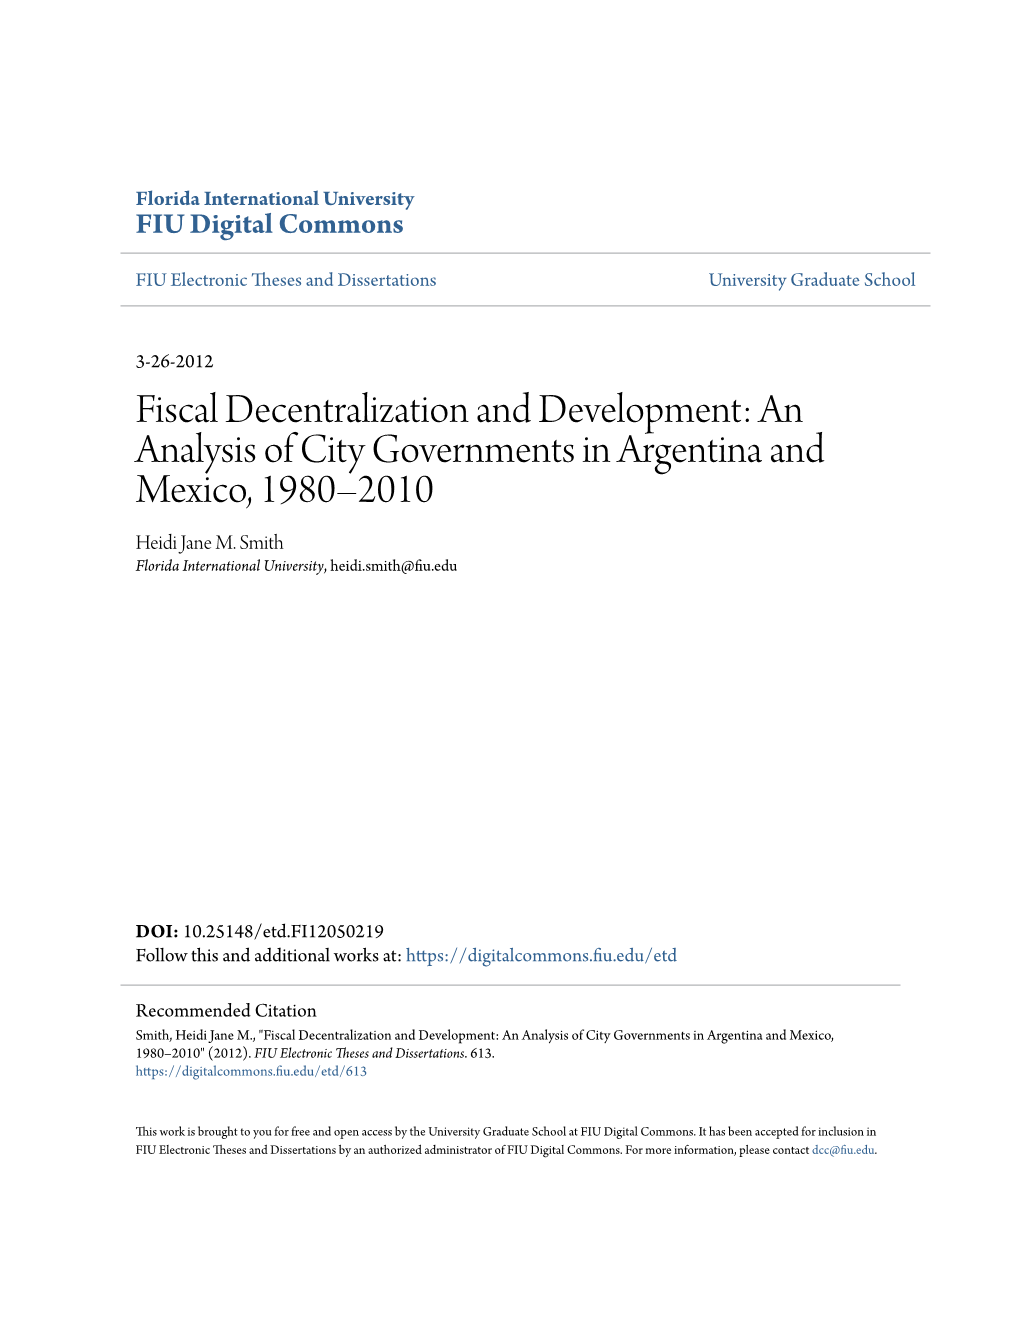 Fiscal Decentralization and Development: an Analysis of City Governments in Argentina and Mexico, 1980–2010 Heidi Jane M